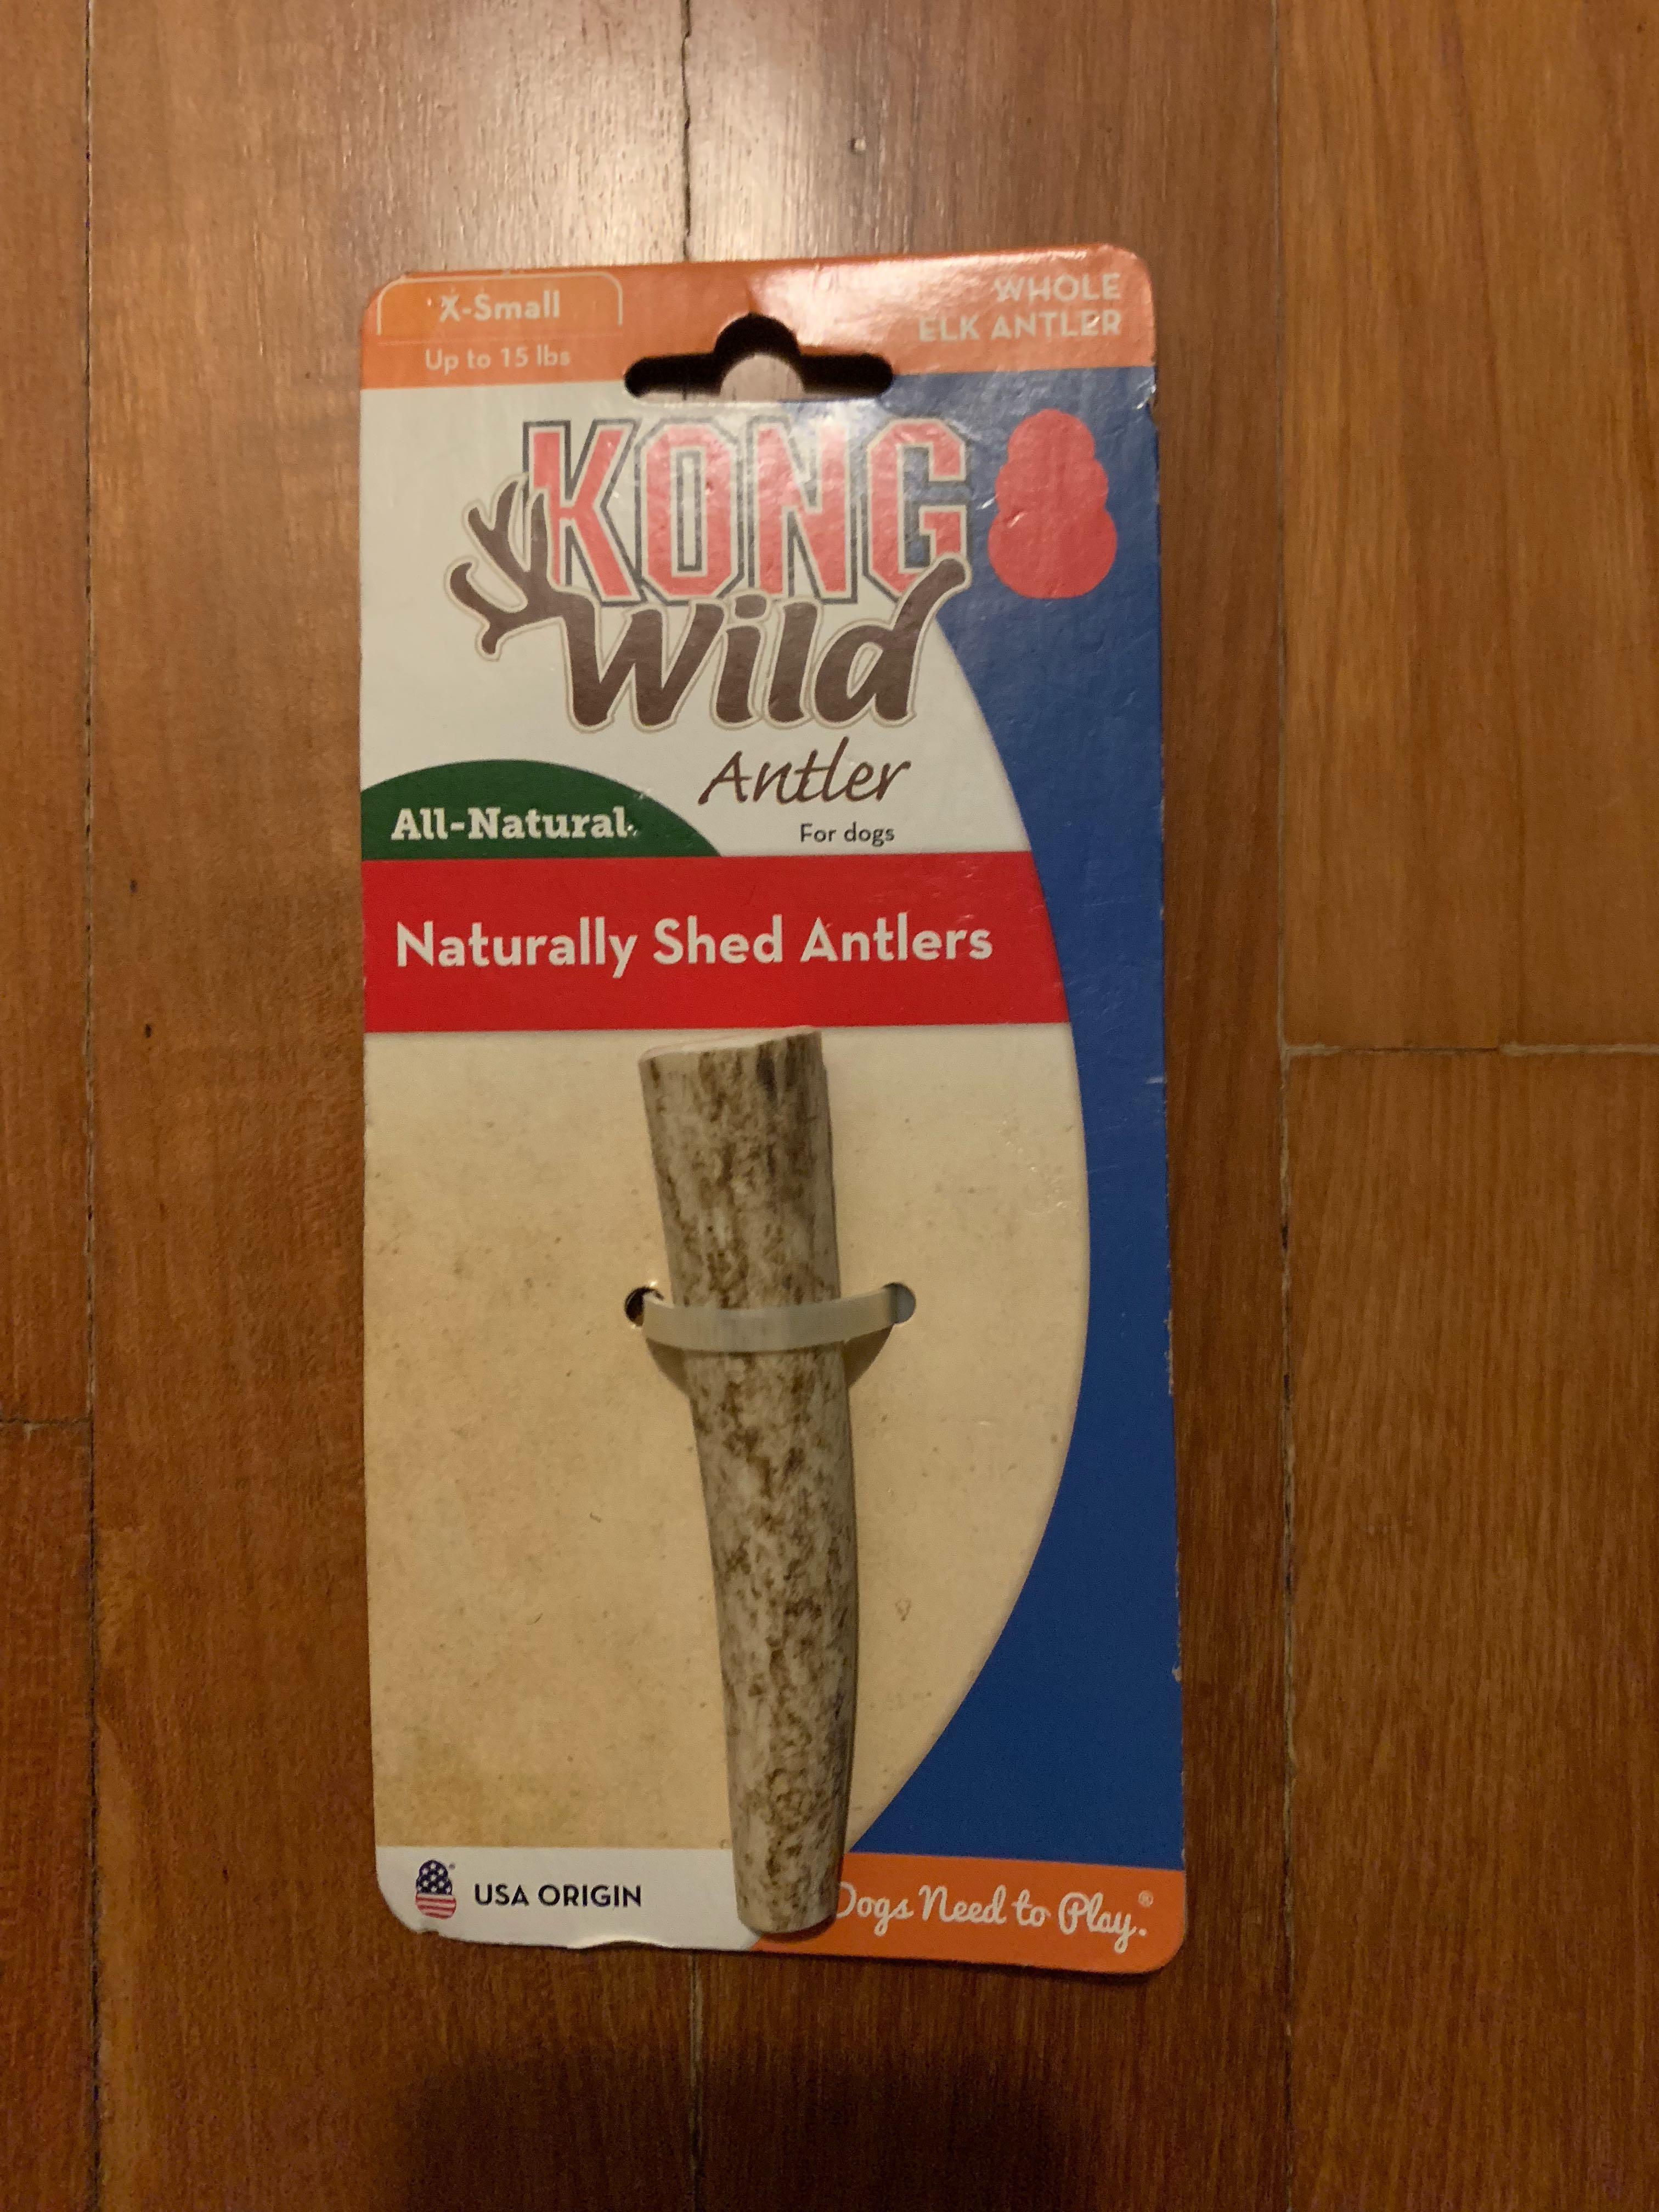 kong wild whole elk antler for dogs